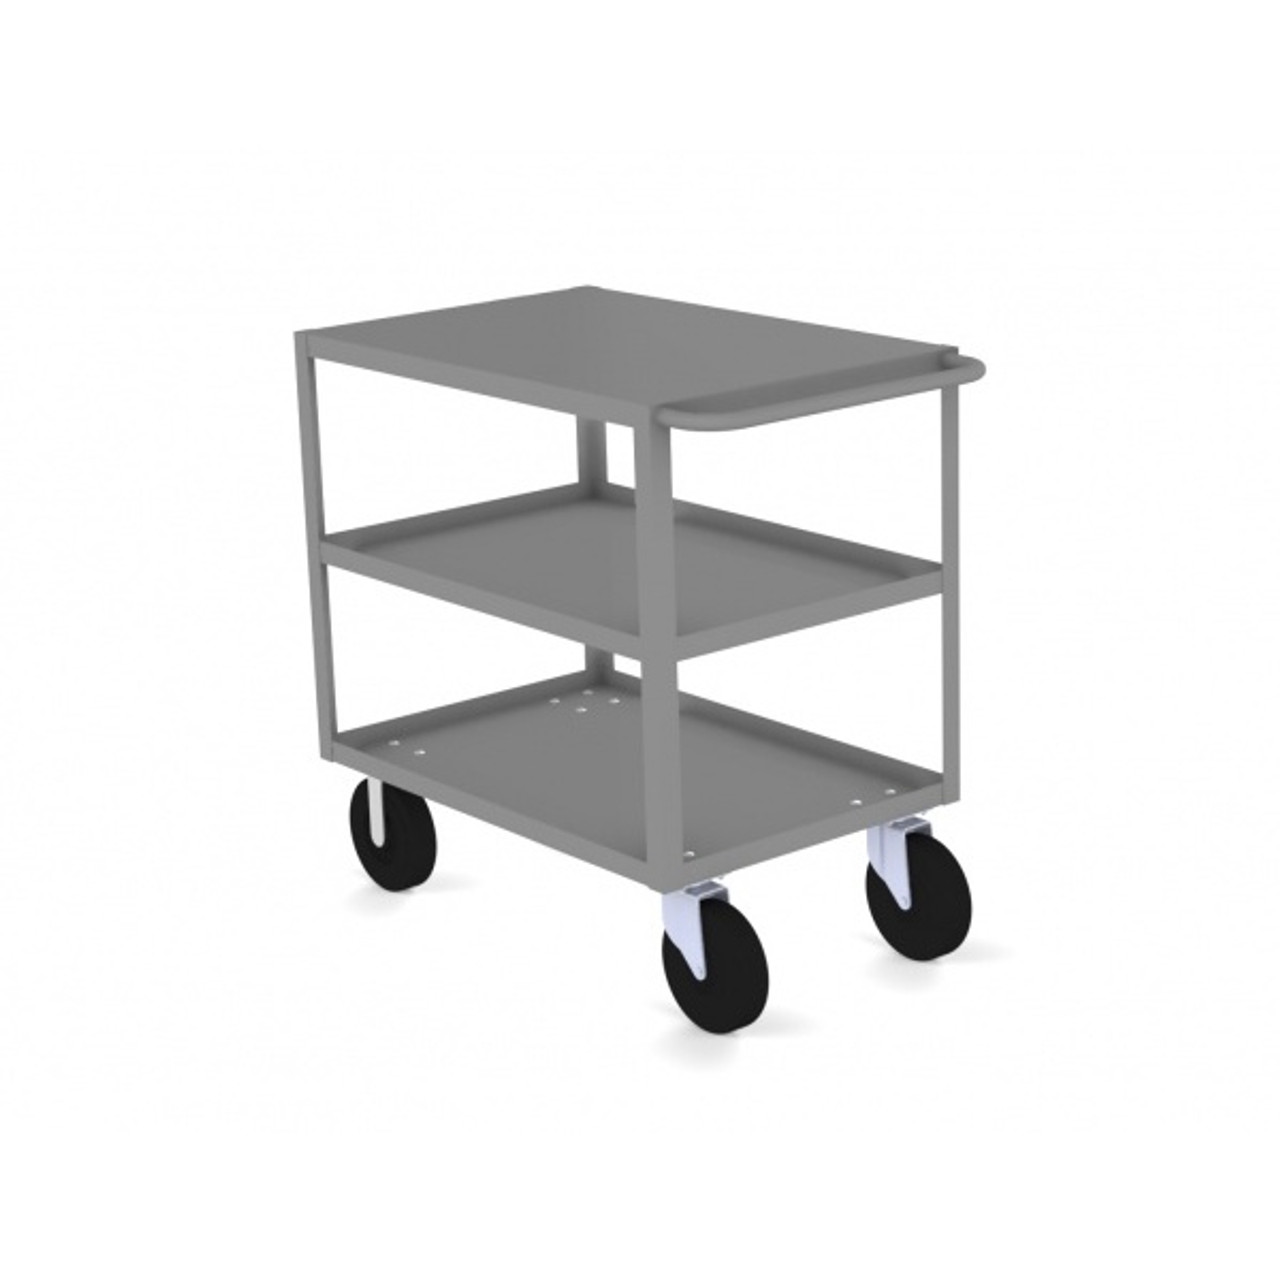 Valley Craft Three Shelf 18 x 36" Flush-Top Utility Cart, Gray with Mold On Casters (CALL FOR BEST PRICING)